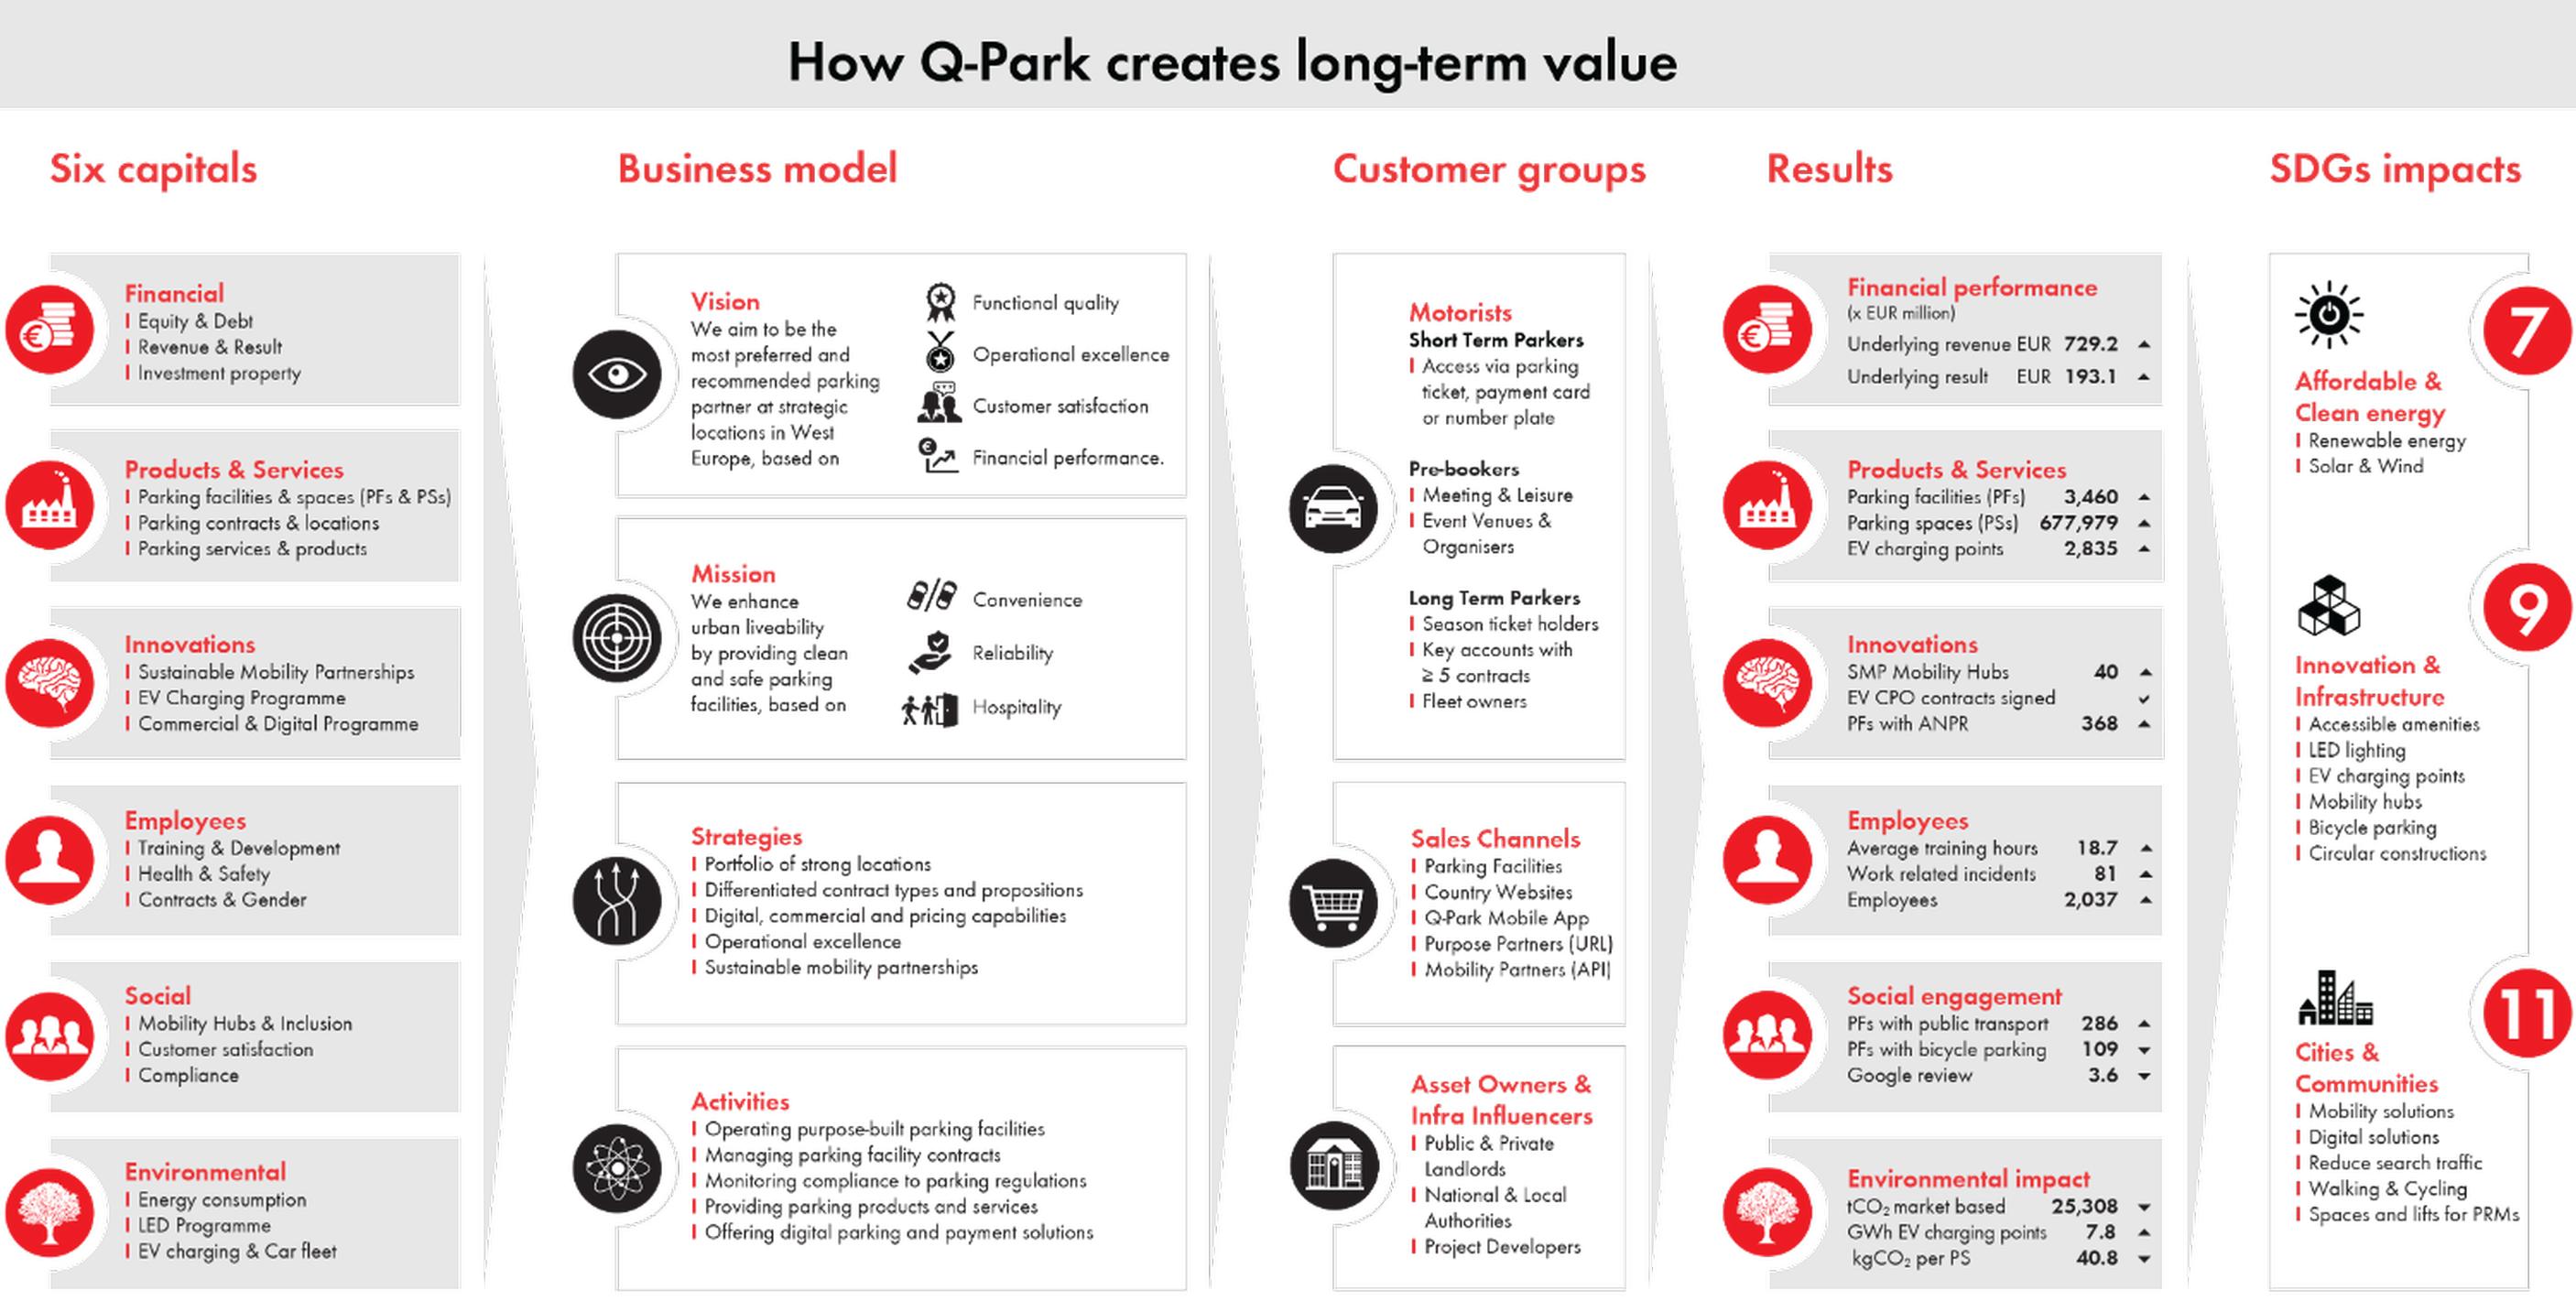 Q-Park’s Annual Corporate and Social Responsibility Report 2022